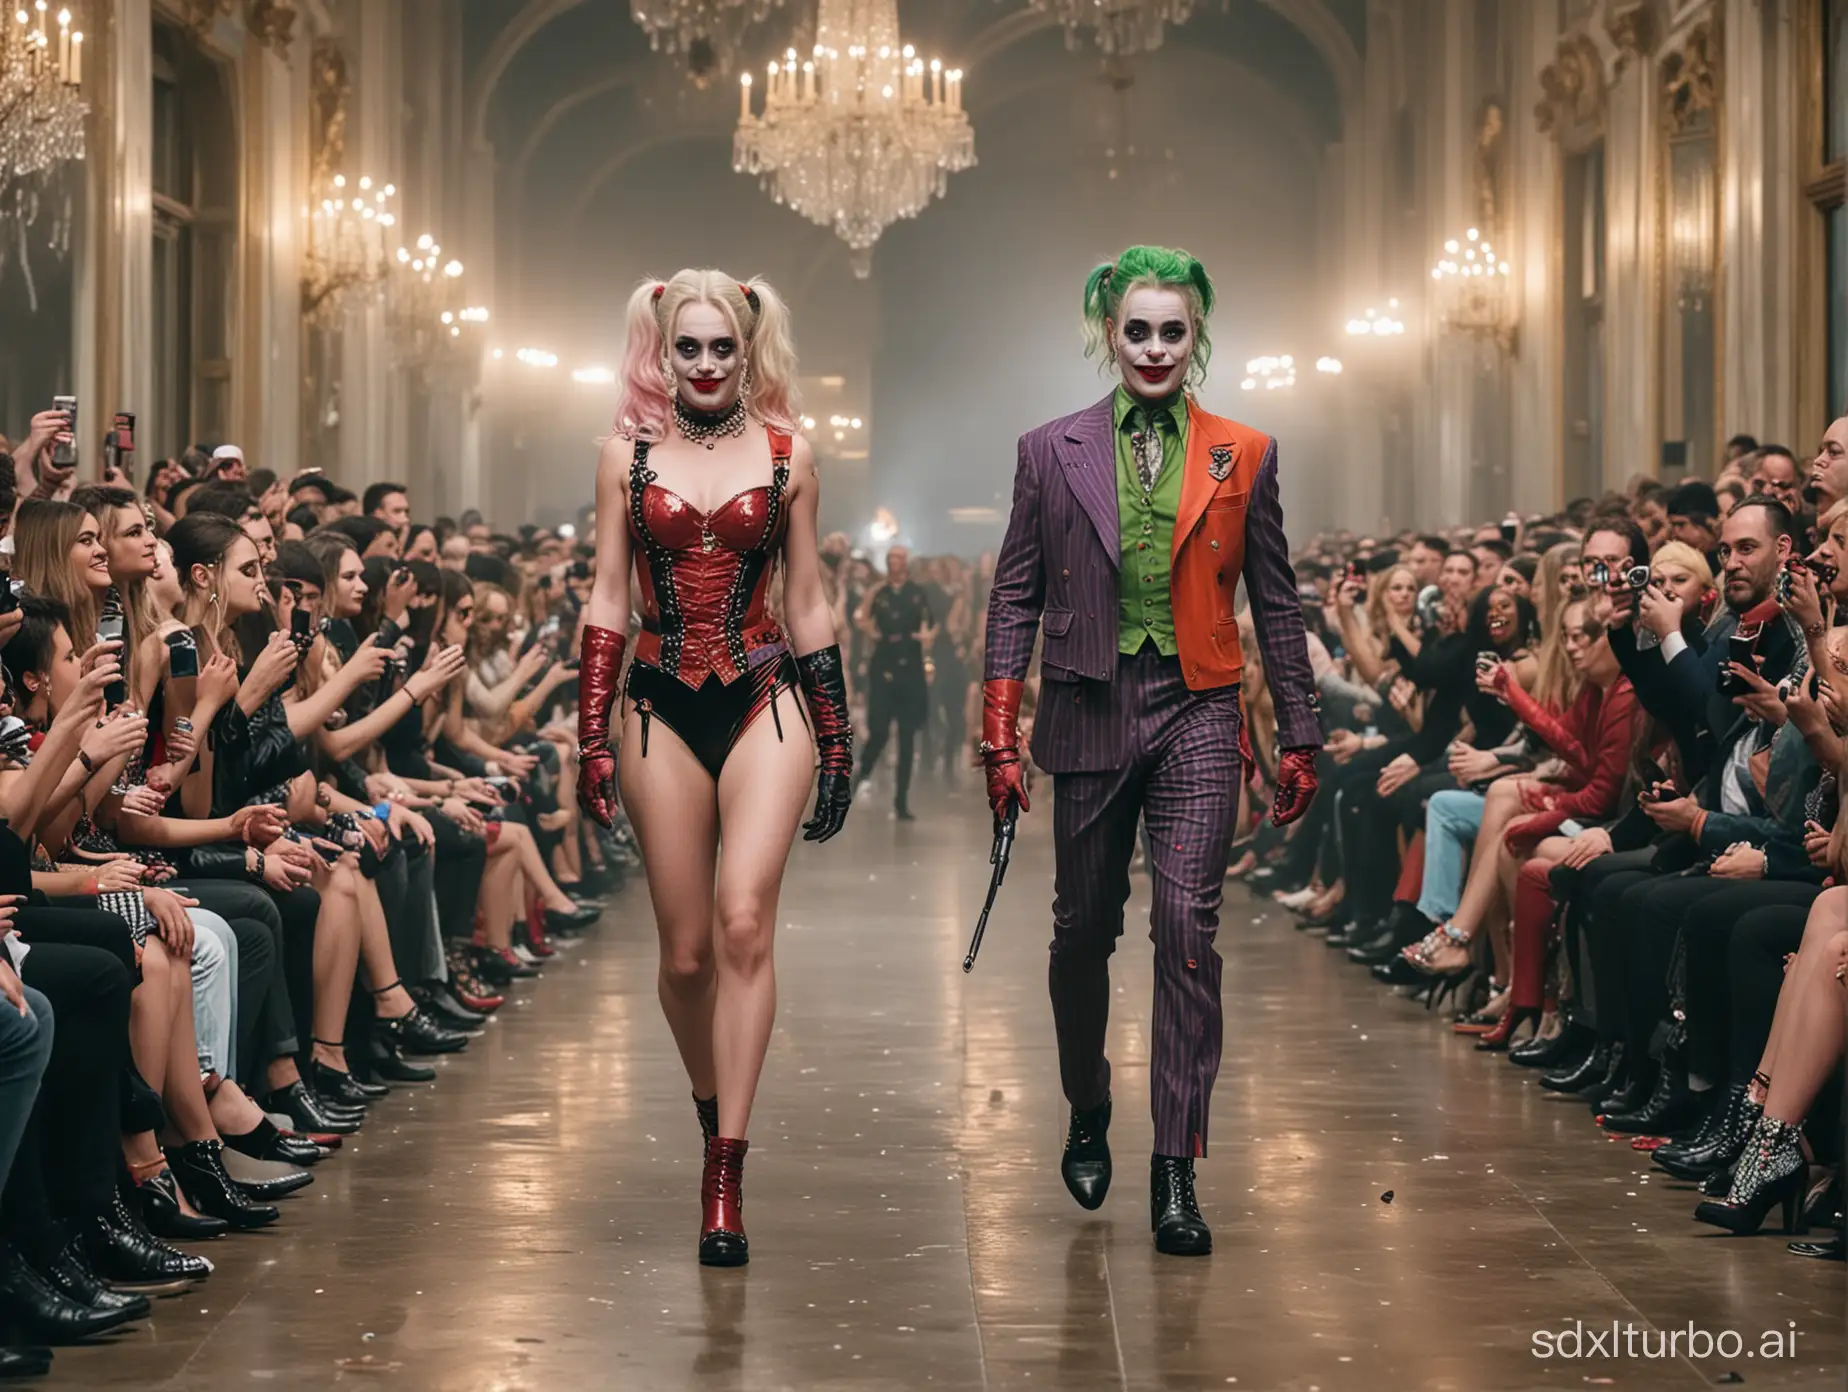 Joker and Harley Quinn walk the runway at Paris Collection, guns, laughing, walking, (full-length image), (audience on both sides), Paris Collection runway, colorful, super delicate photos, Paris Collection runway, (eccentric fashion), outrageous fashion, flashy fashion, Paris Collection